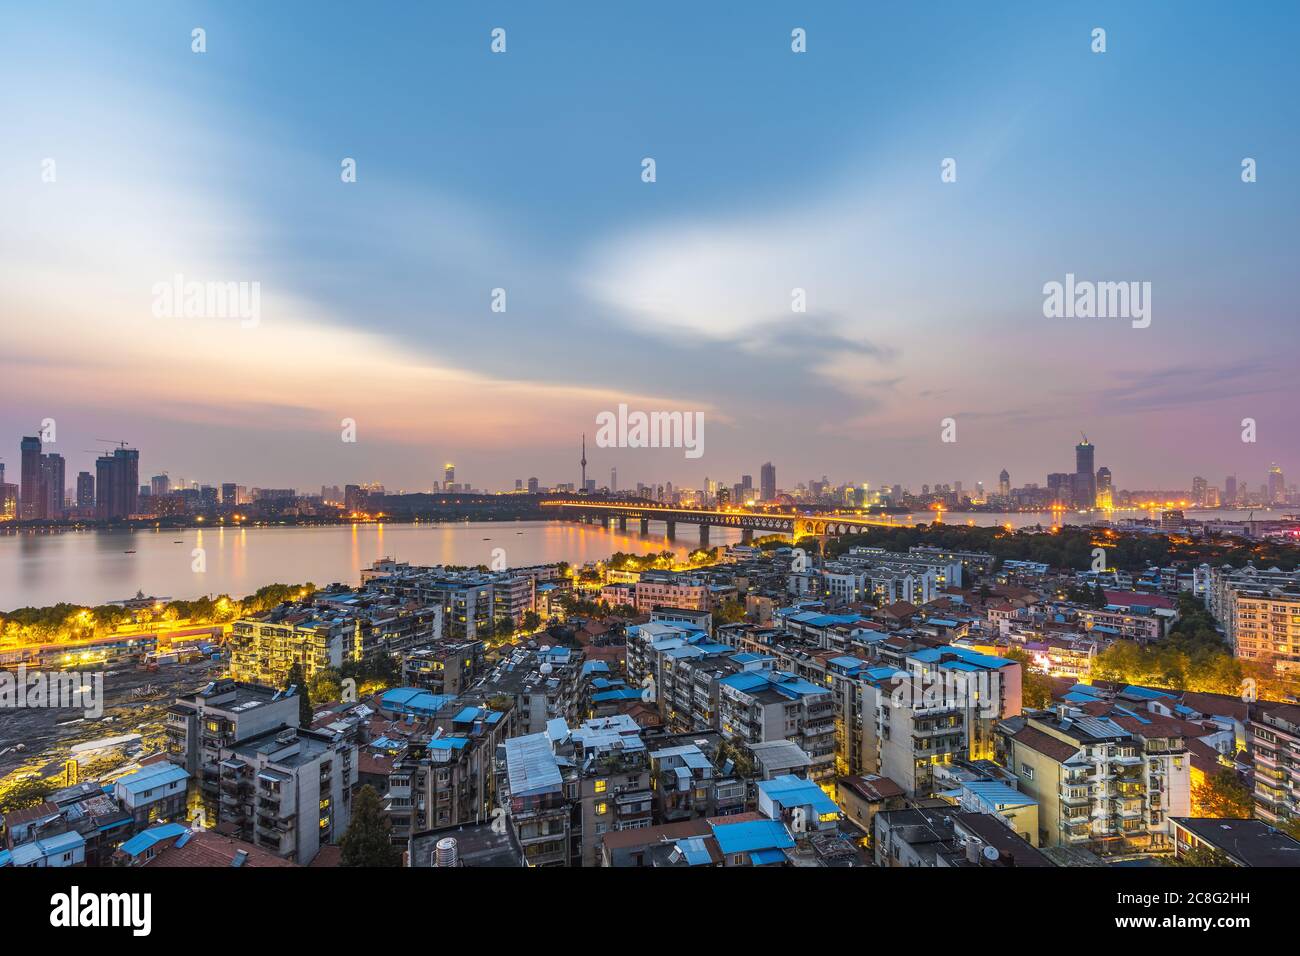 Aerial view of  Wuhan city .Panoramic skyline and buildings beside yangtze river. Stock Photo